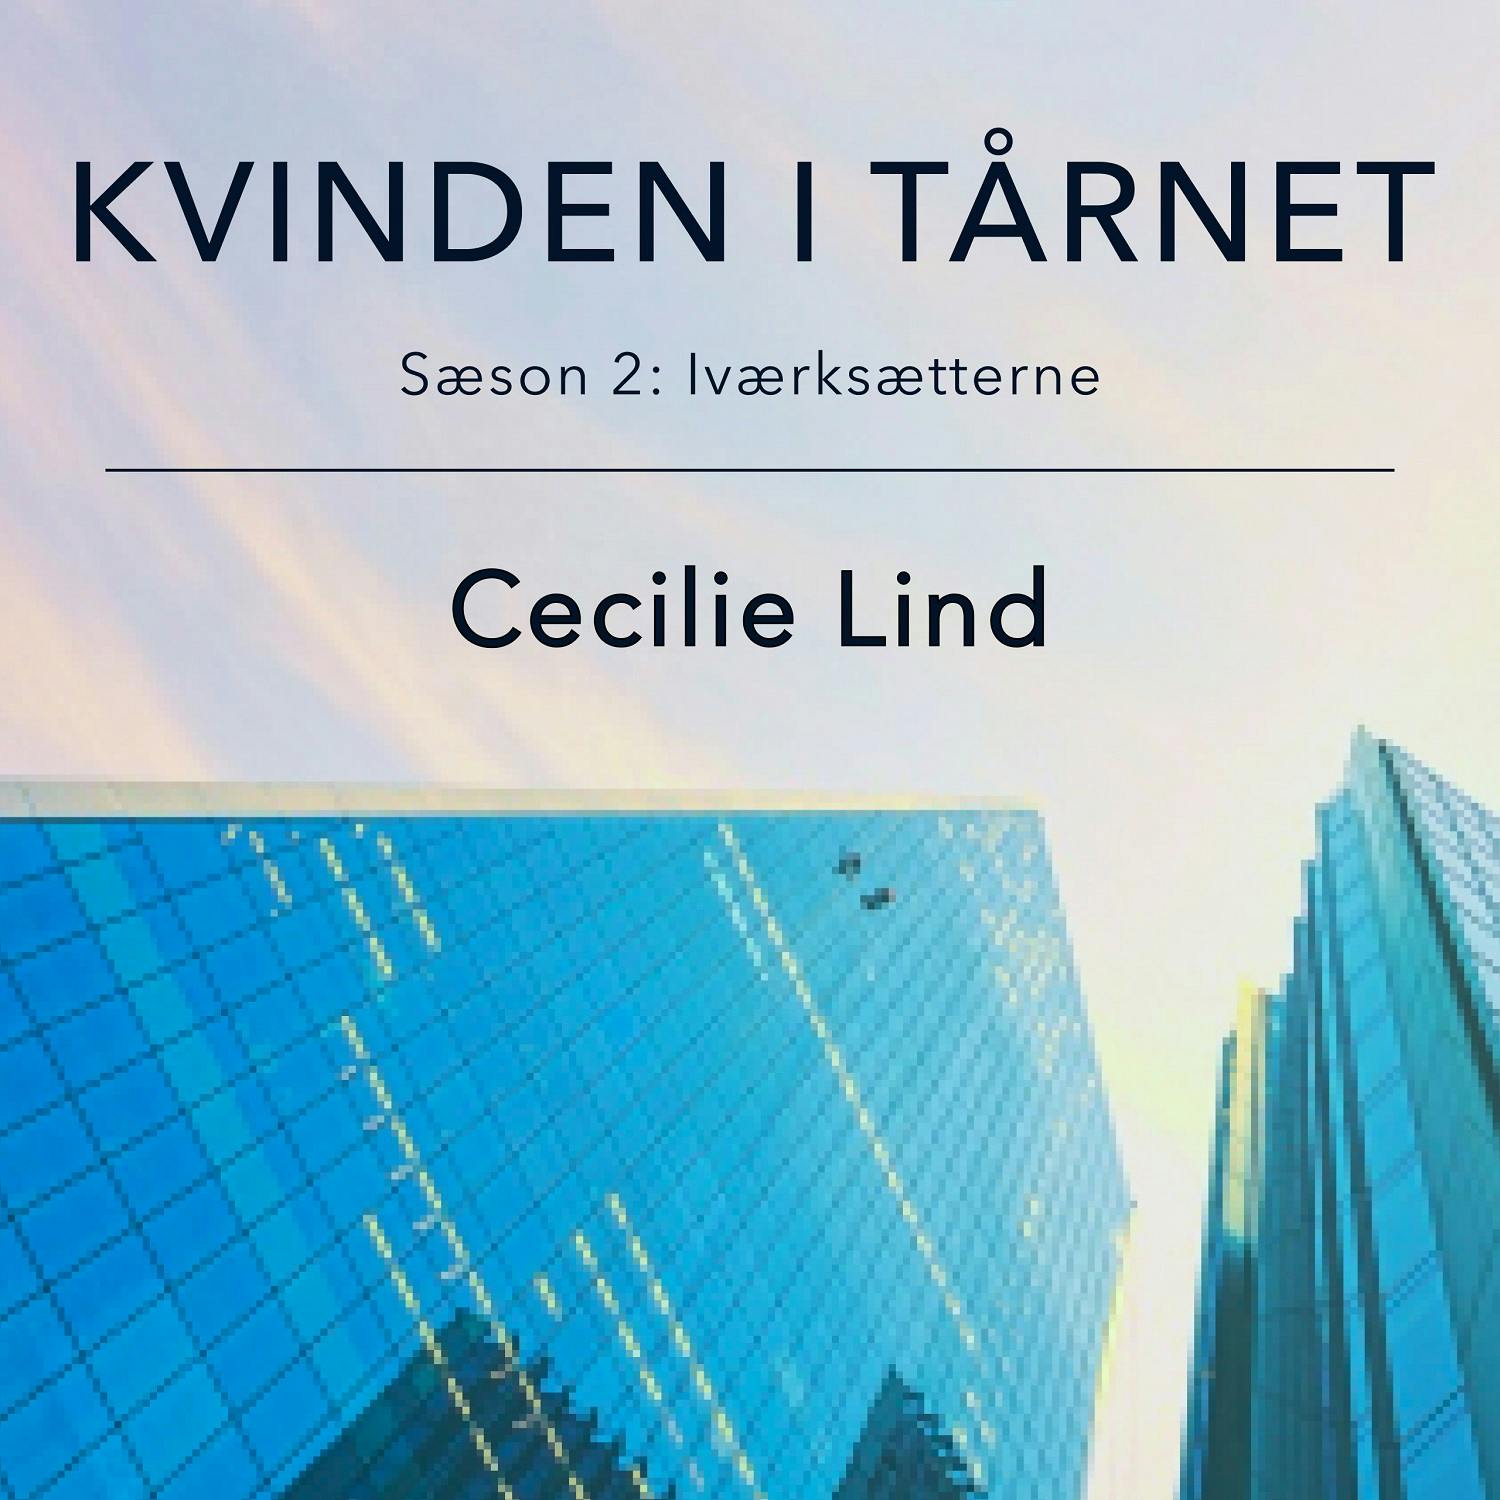 Cecilie Lind